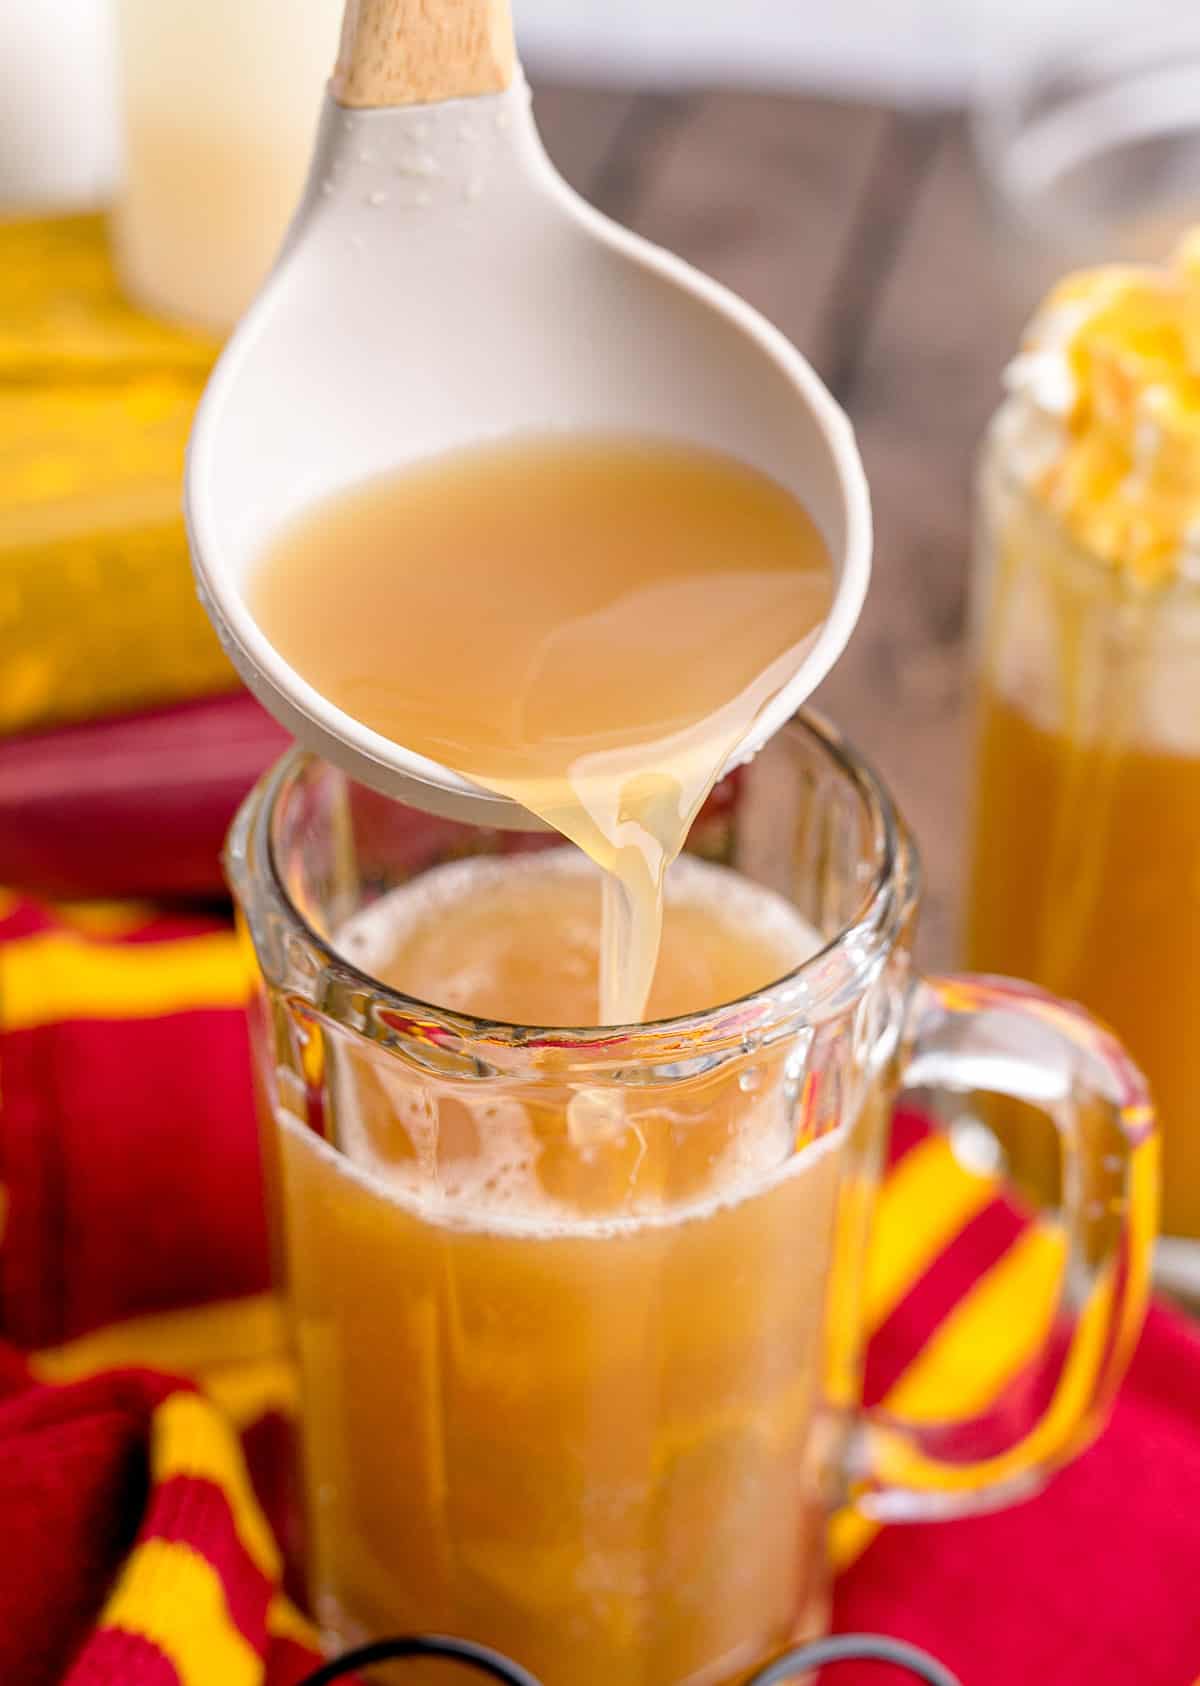 Ladling homemade butterbeer into a large glass mug.